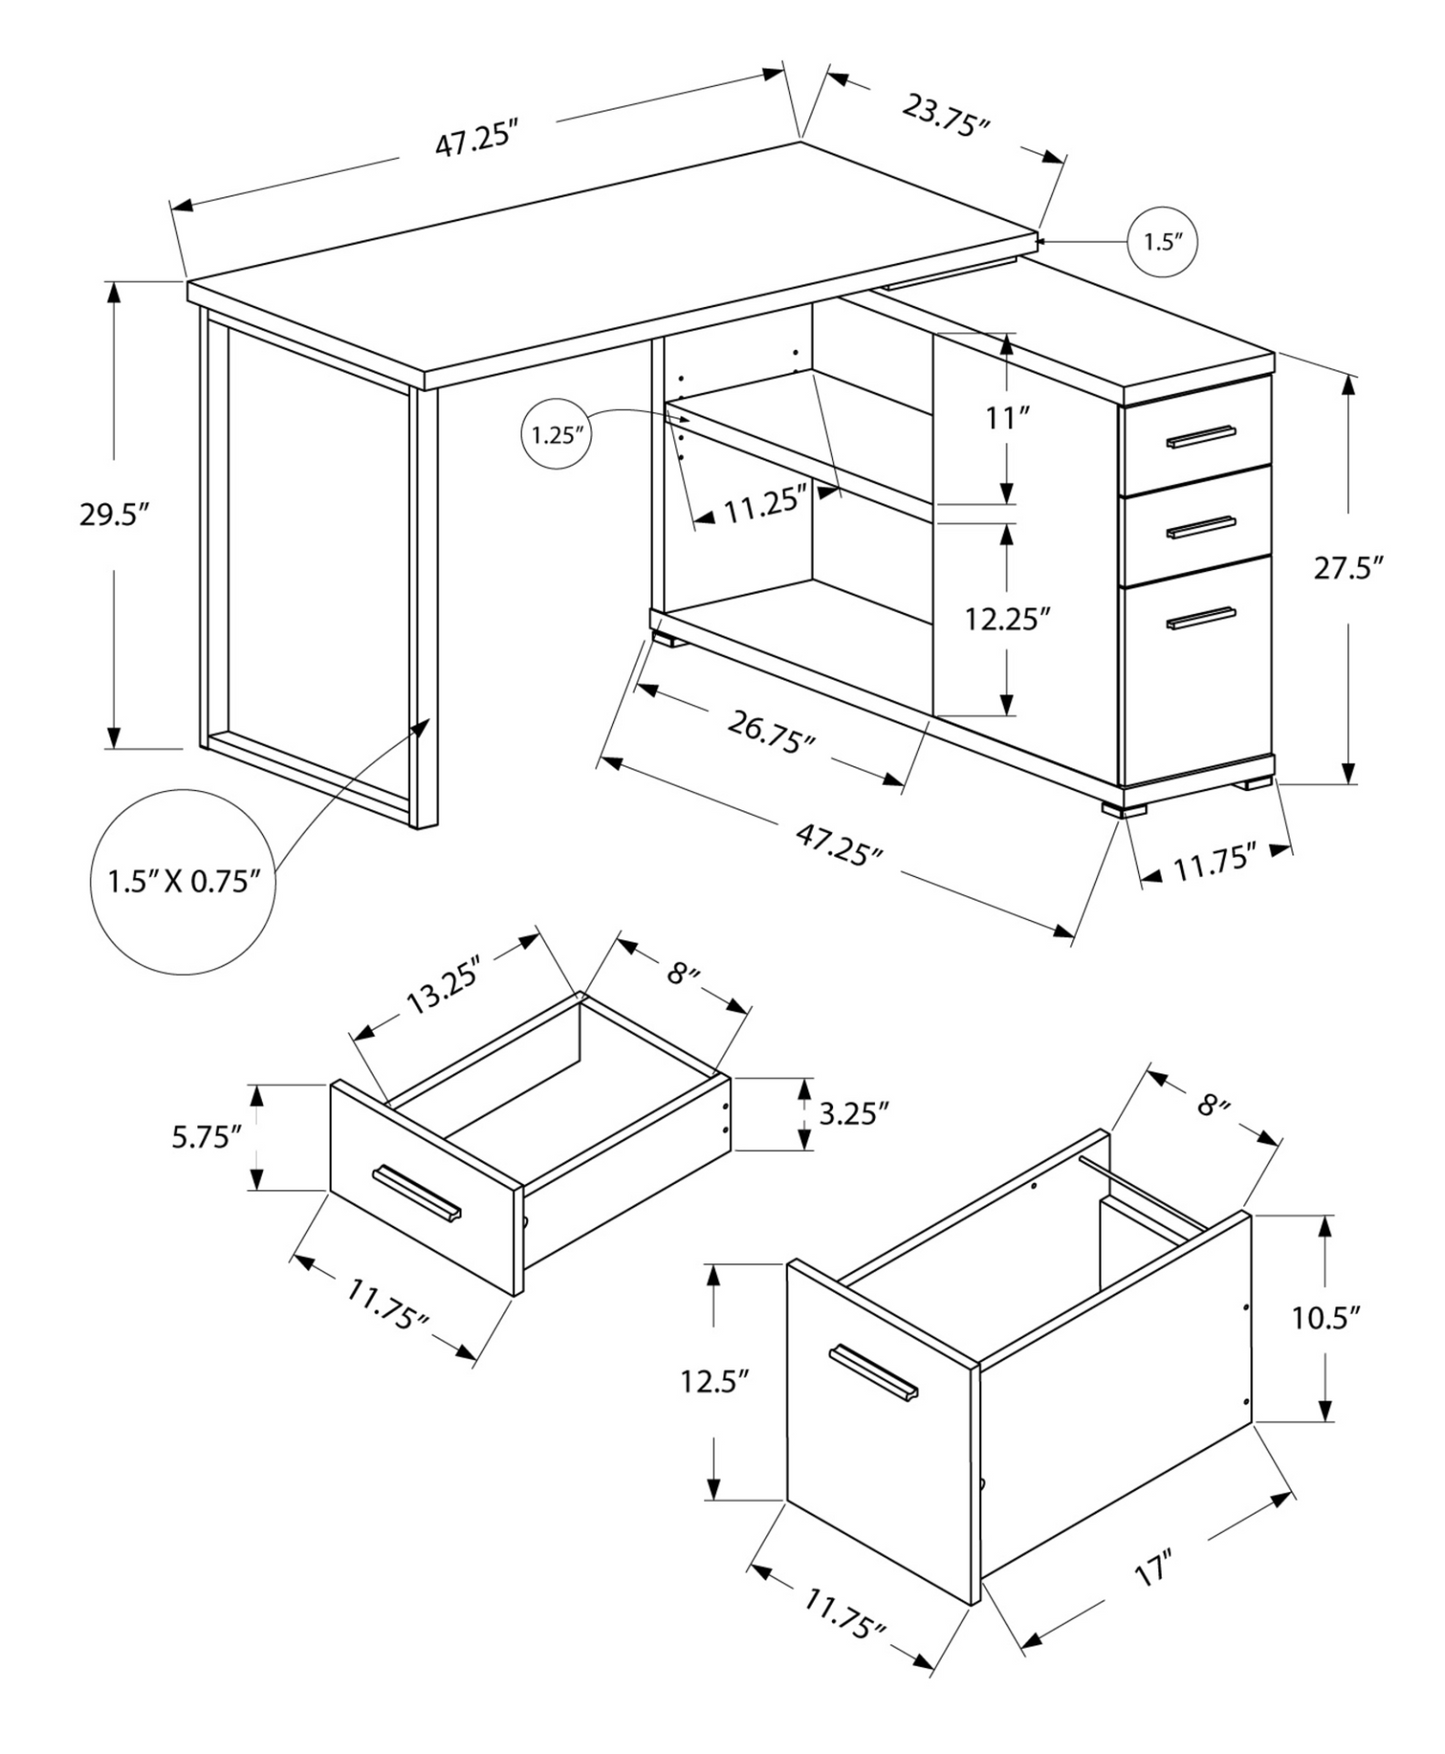 47" White L-Shape Computer Desk With Three Drawers